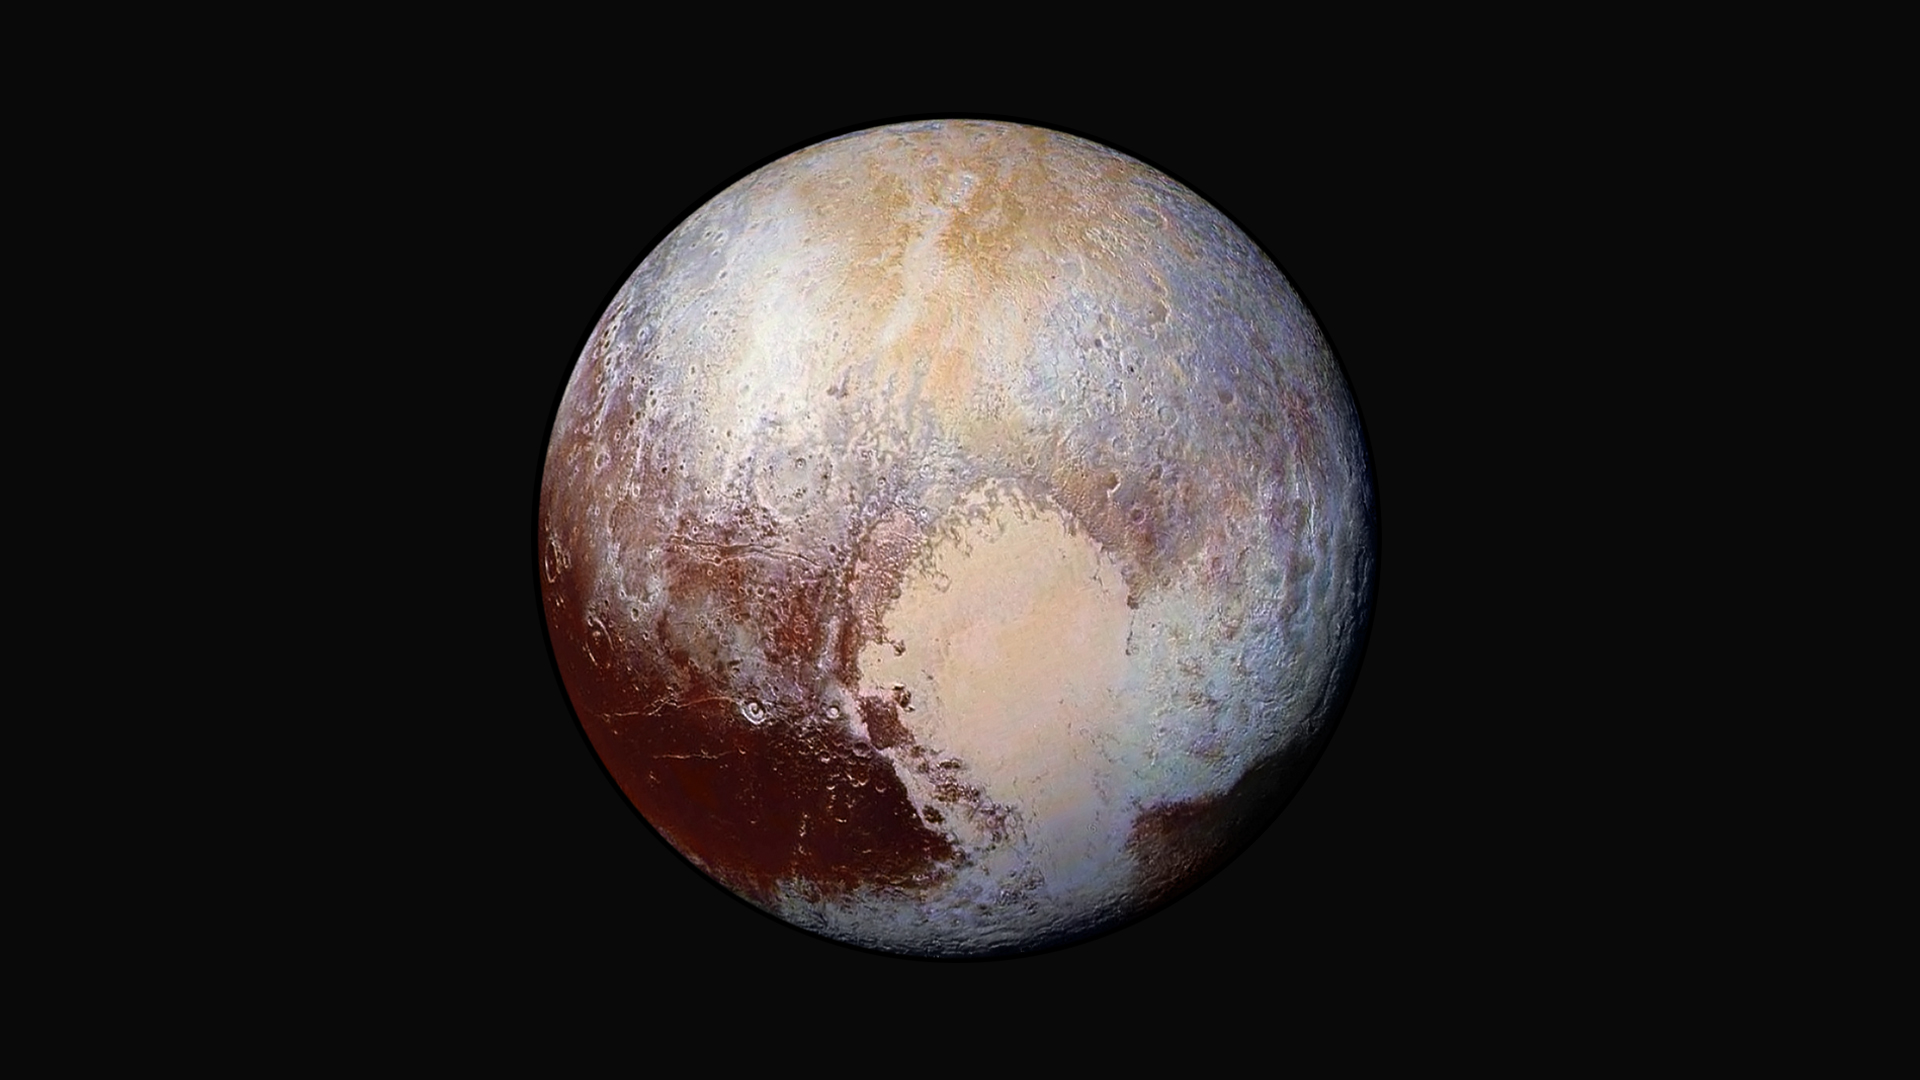 Pluto may be made up of a billion comets